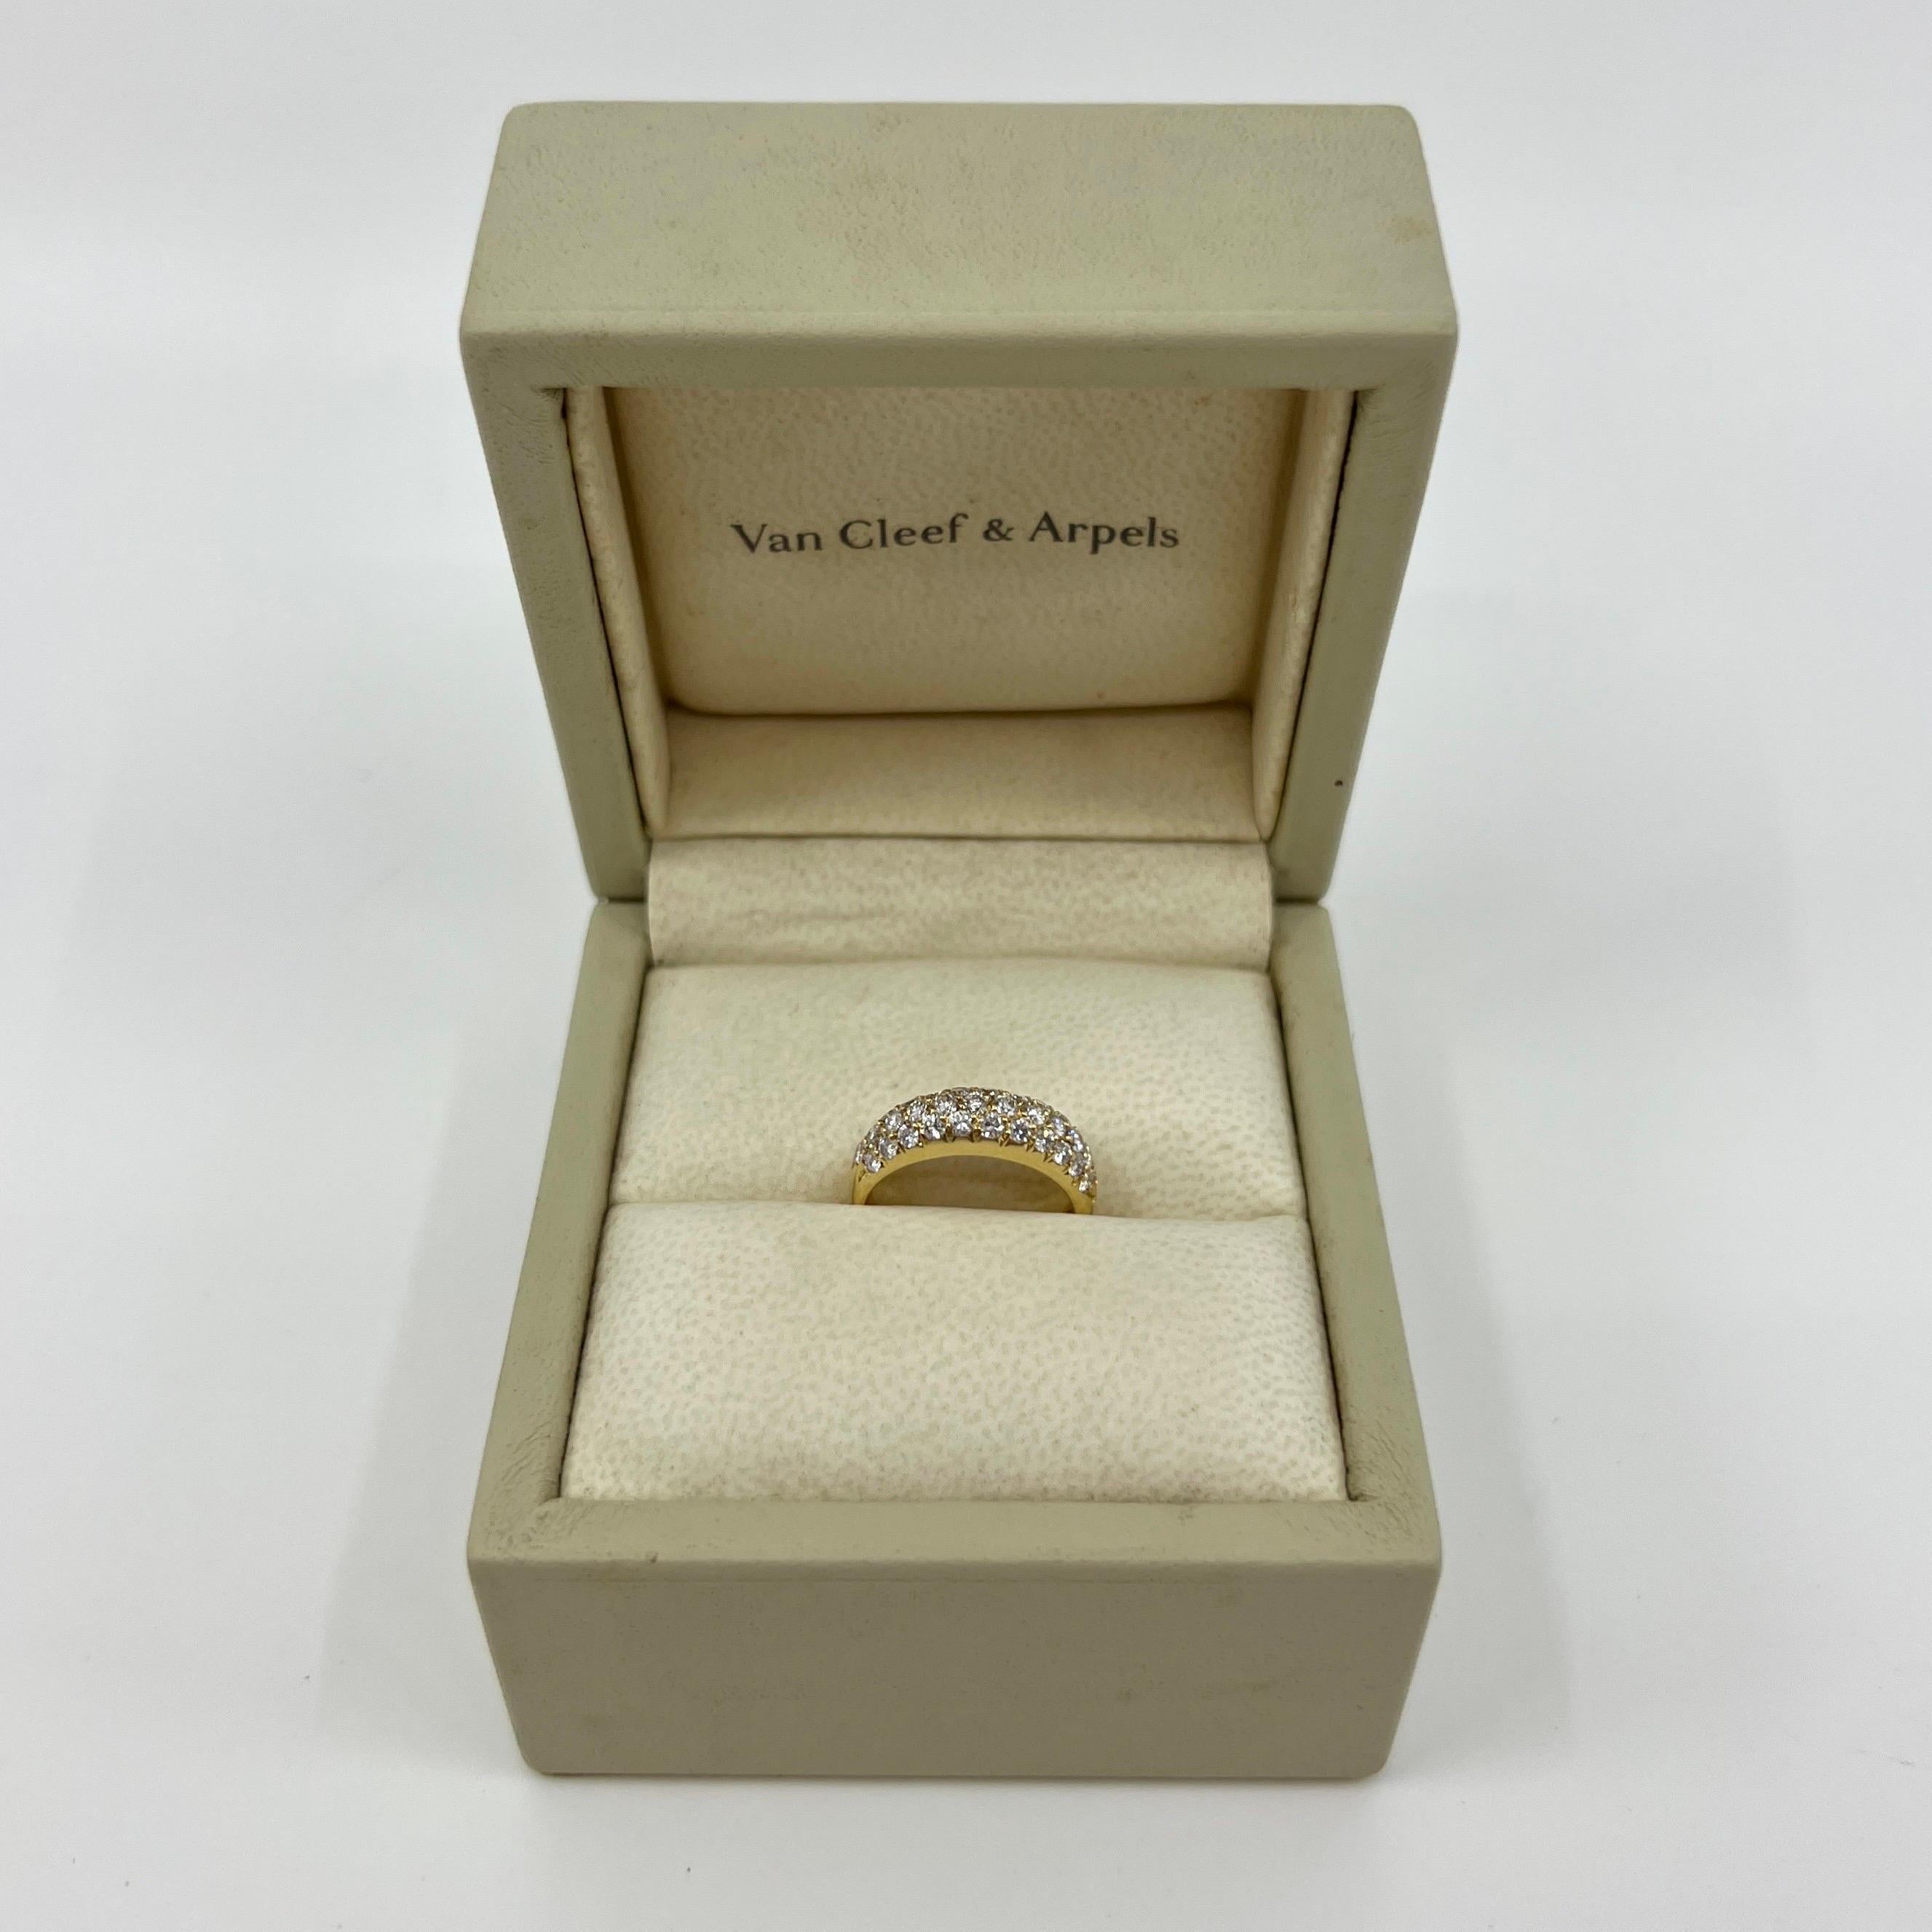 Rare Vintage Van Cleef & Arpels Pavé Diamond 18k Yellow Gold Band Ring.

This beautifully made ring by VCA features a curved dome design with three rows of beautifully set Pavé diamonds going halfway around the band.

The diamonds are of excellent